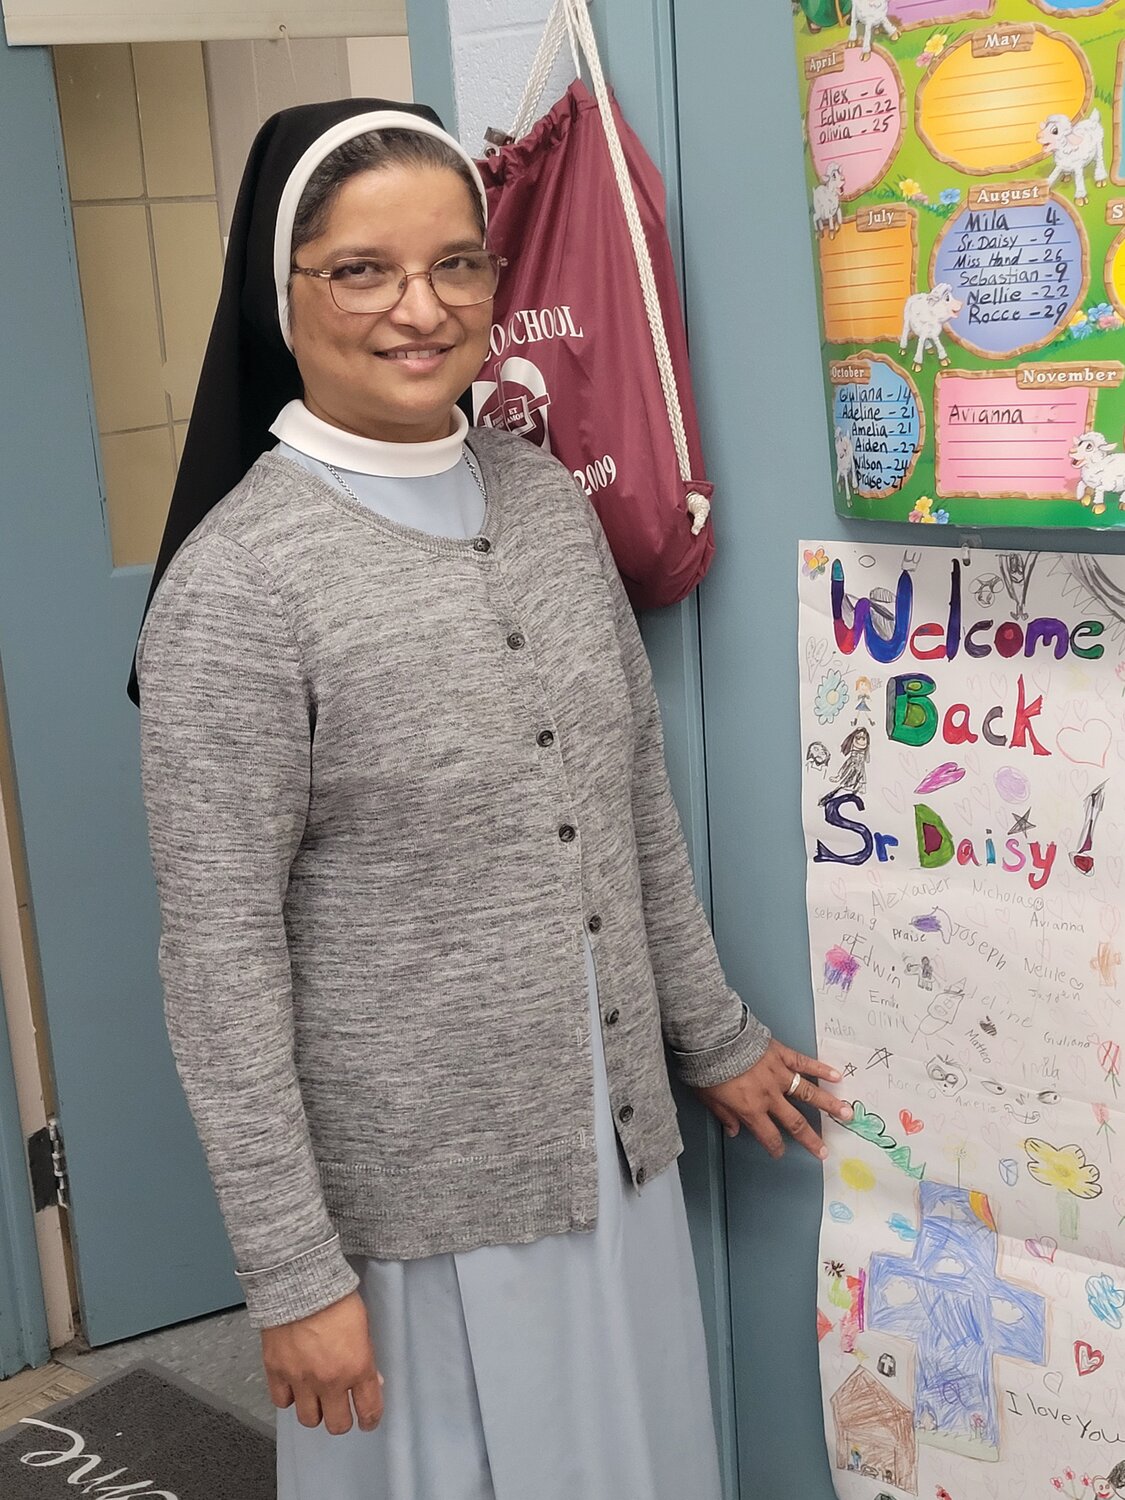 WELCOME BACK BANNER: St. Rocco second grade teacher and nun St. Rocco’s Sister Daisy Kollamparampil shows off the “Welcome Back” banner she received when she came back to work after recovering from an accident on Nov. 7.